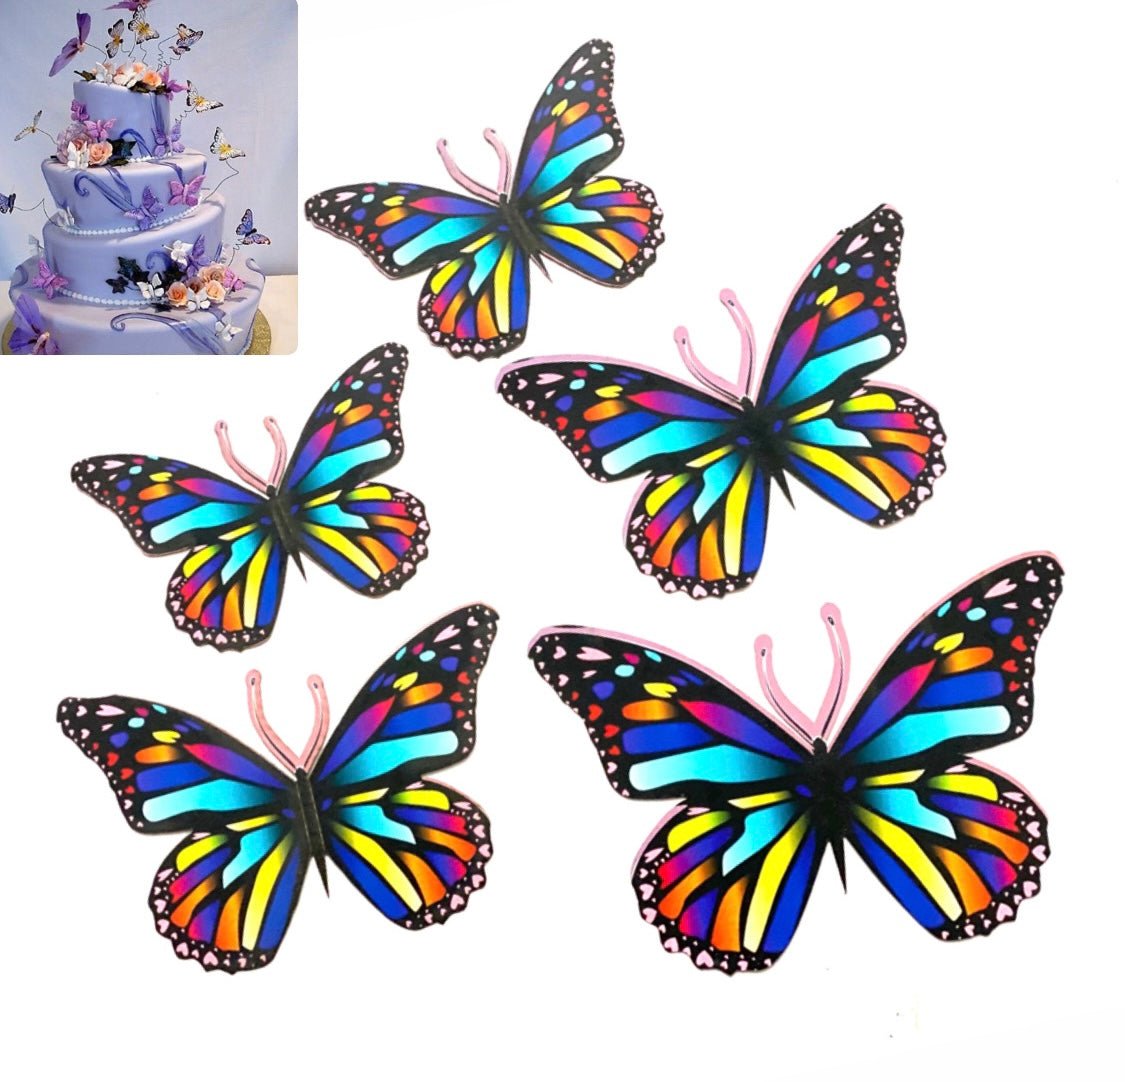 Bakewareind 3D Double Side Printed Butterfly topper, MultiColored freeshipping - Bakewareindia